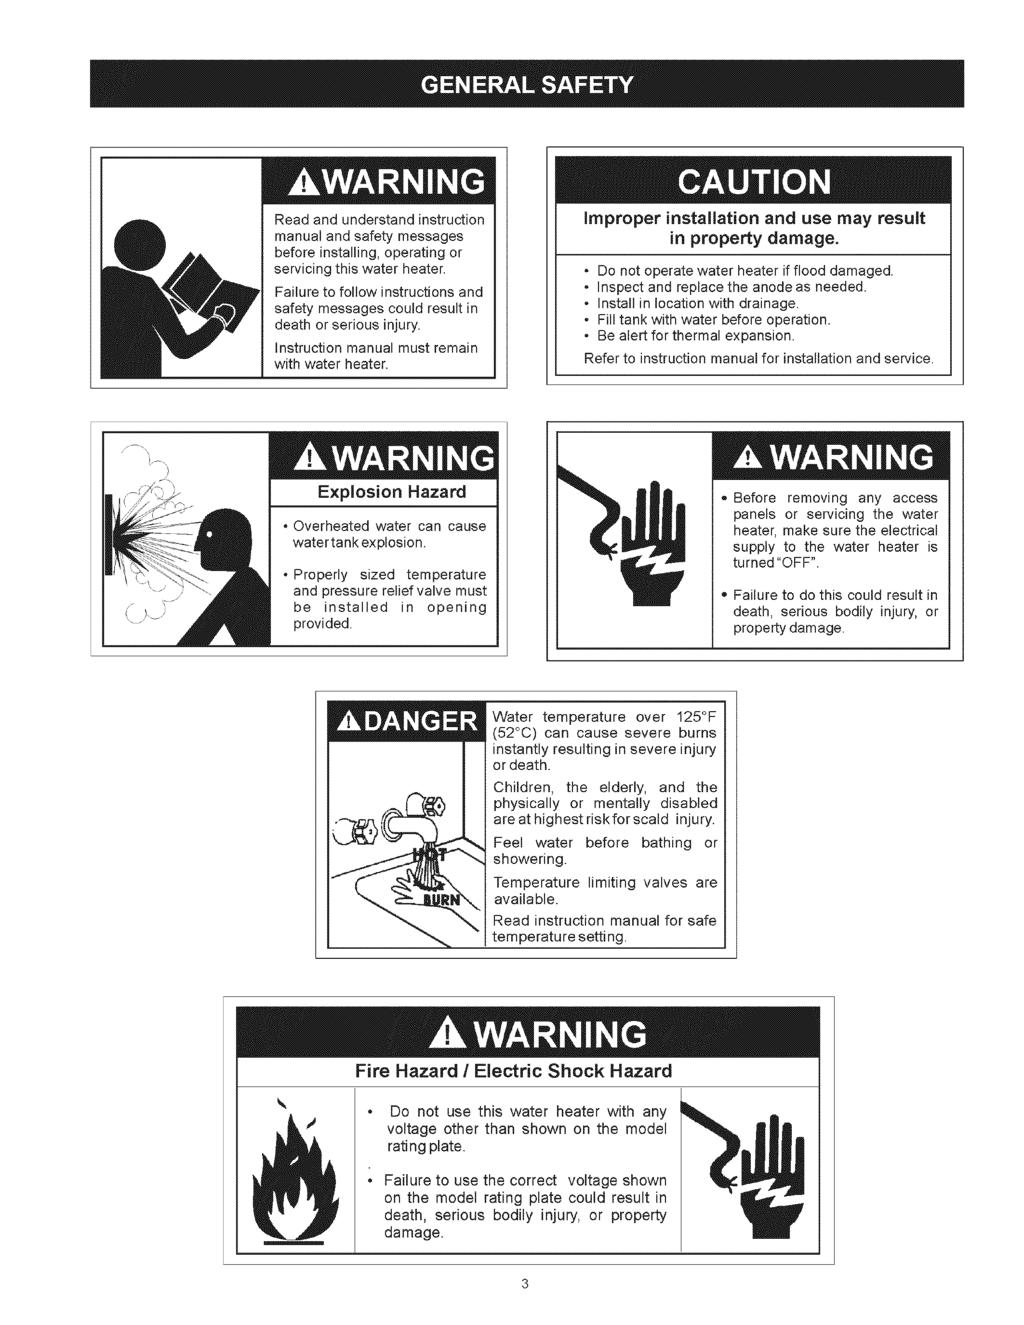 Readandunderstand instruction manual andsafetymessages beforeinstalling, operating or servicing thiswaterheater. Failuretofollowinstructions and safetymessages couldresult in deathorserious injury.